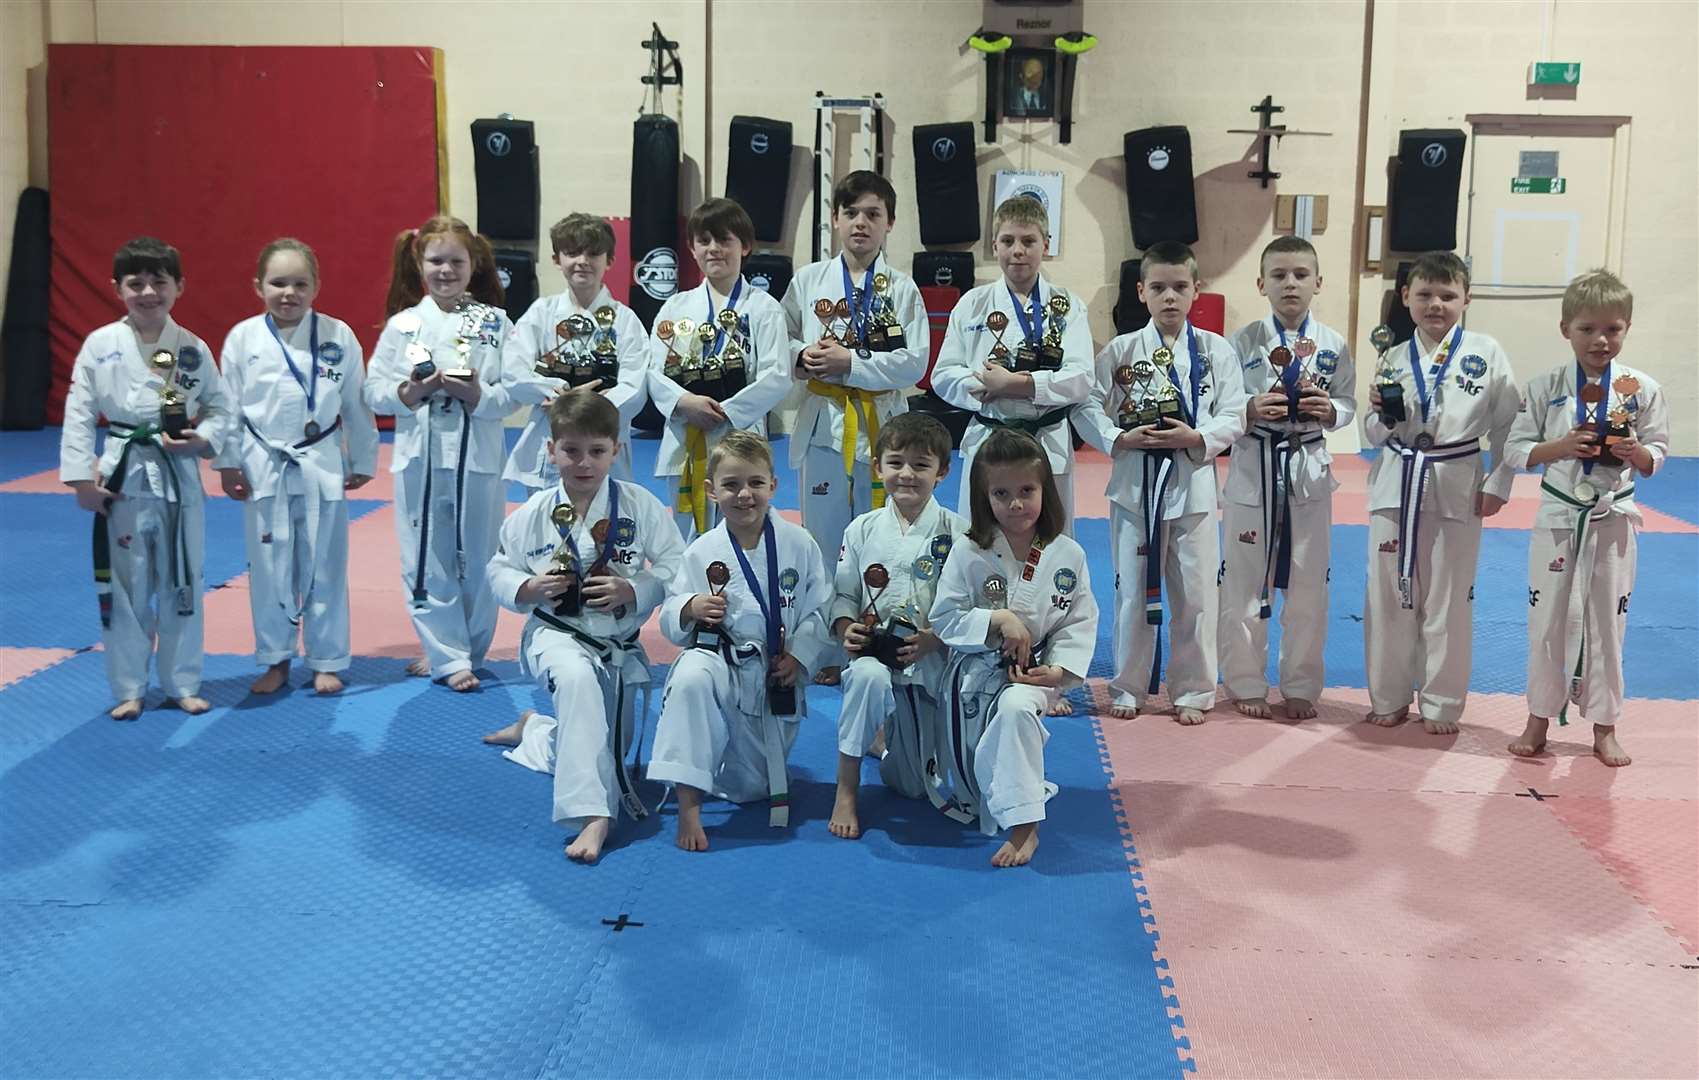 Dunbar Blackbelt in Forres collected numerous medals at the competition in Nairn.